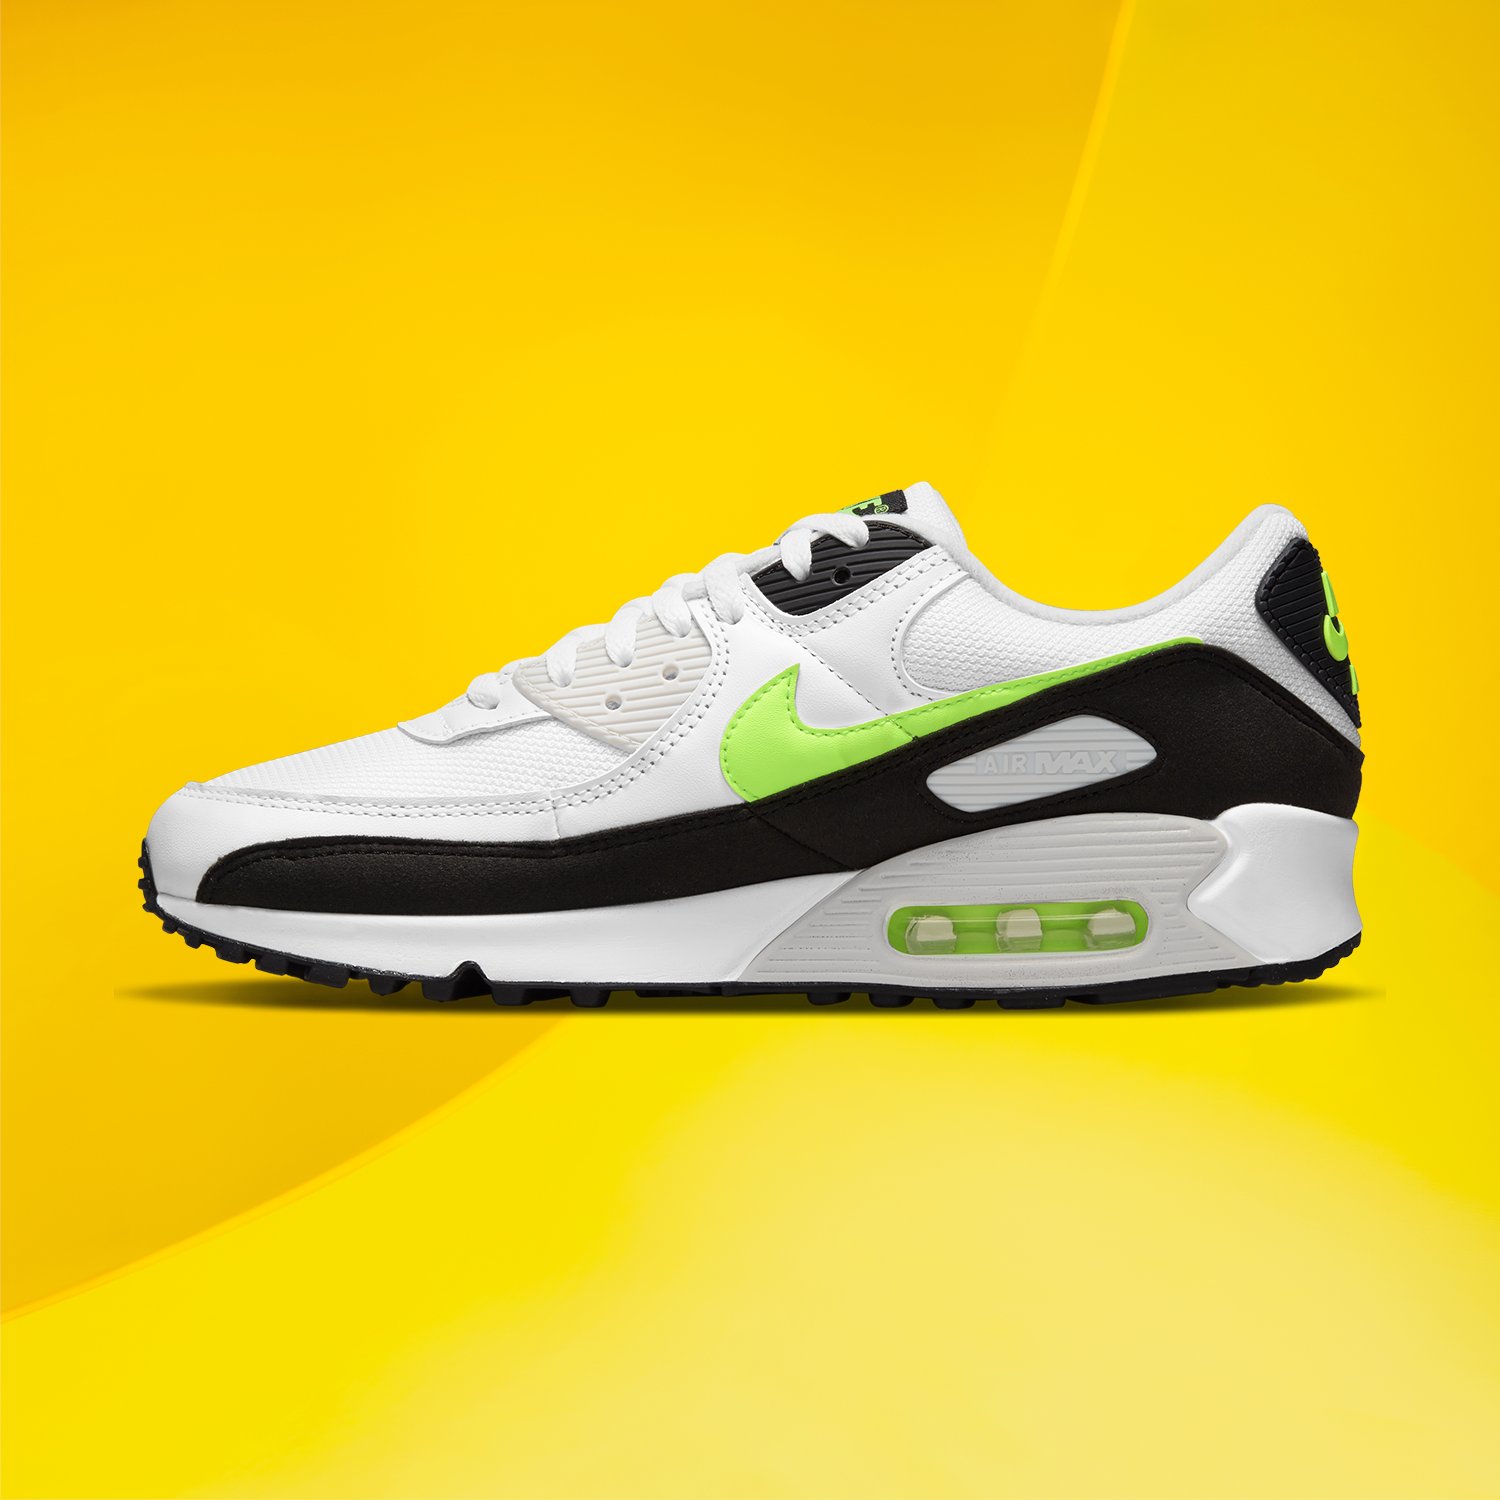 sportscene sur Twitter : "Nothing as fly, as comfortable, nothing as proven—the Nike Max 90 stays true to its roots with a twist colour. Available in UK6-11 @